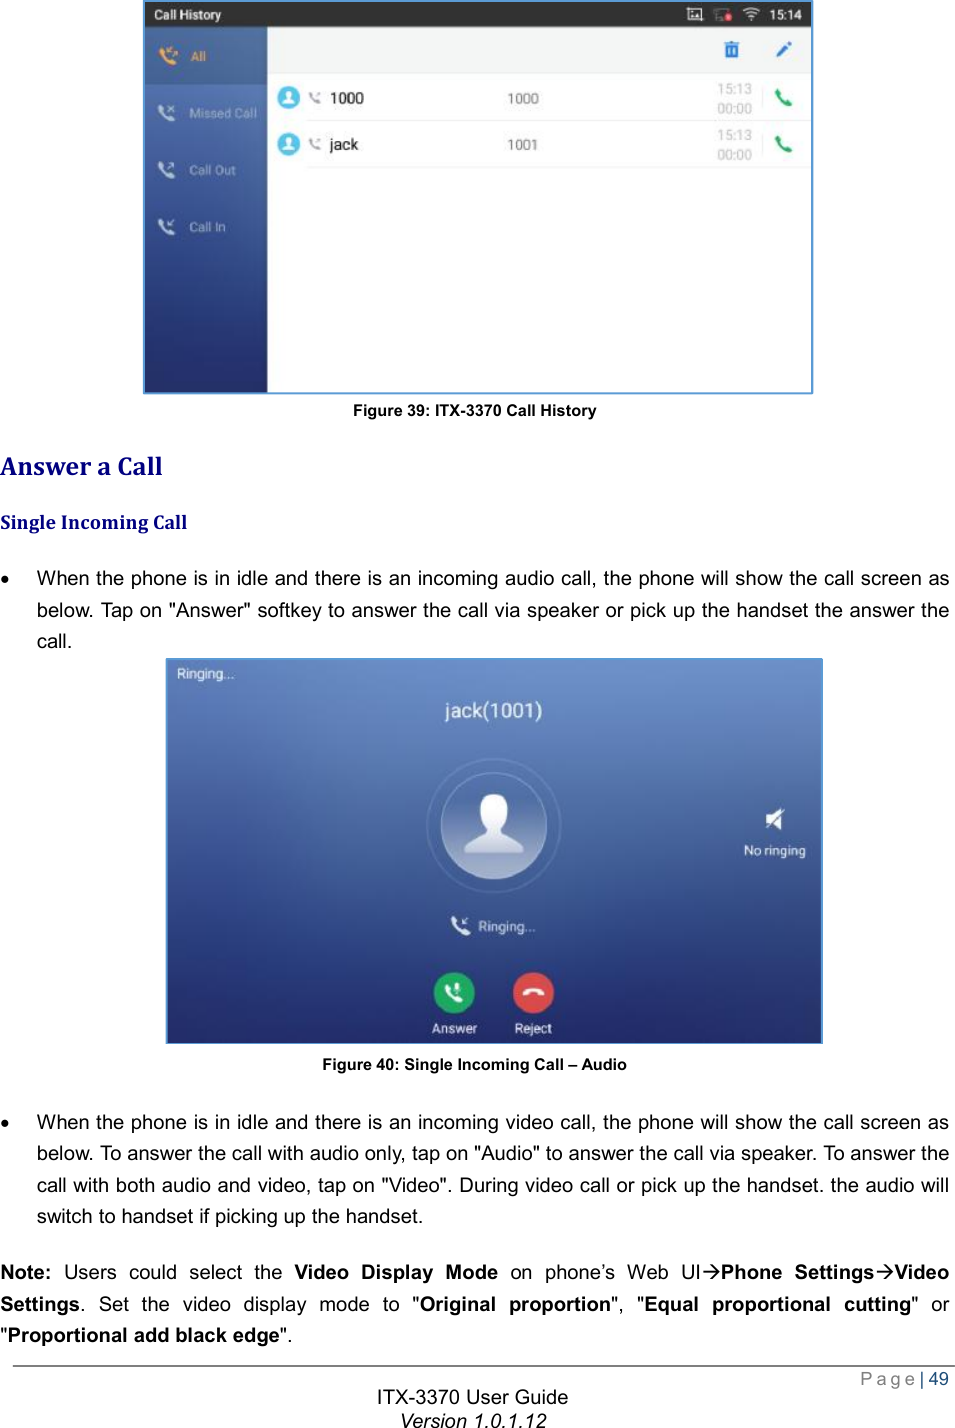  Page| 49  ITX-3370 User Guide Version 1.0.1.12   Figure 39: ITX-3370 Call History Answer a Call Single Incoming Call · When the phone is in idle and there is an incoming audio call, the phone will show the call screen as below. Tap on &quot;Answer&quot; softkey to answer the call via speaker or pick up the handset the answer the call.  Figure 40: Single Incoming Call – Audio  · When the phone is in idle and there is an incoming video call, the phone will show the call screen as below. To answer the call with audio only, tap on &quot;Audio&quot; to answer the call via speaker. To answer the call with both audio and video, tap on &quot;Video&quot;. During video call or pick up the handset. the audio will switch to handset if picking up the handset. Note: Users could select the  Video Display Mode on phone’s Web UIàPhone SettingsàVideo Settings. Set the video display mode to &quot;Original proportion&quot;, &quot;Equal proportional cutting&quot; or &quot;Proportional add black edge&quot;.  